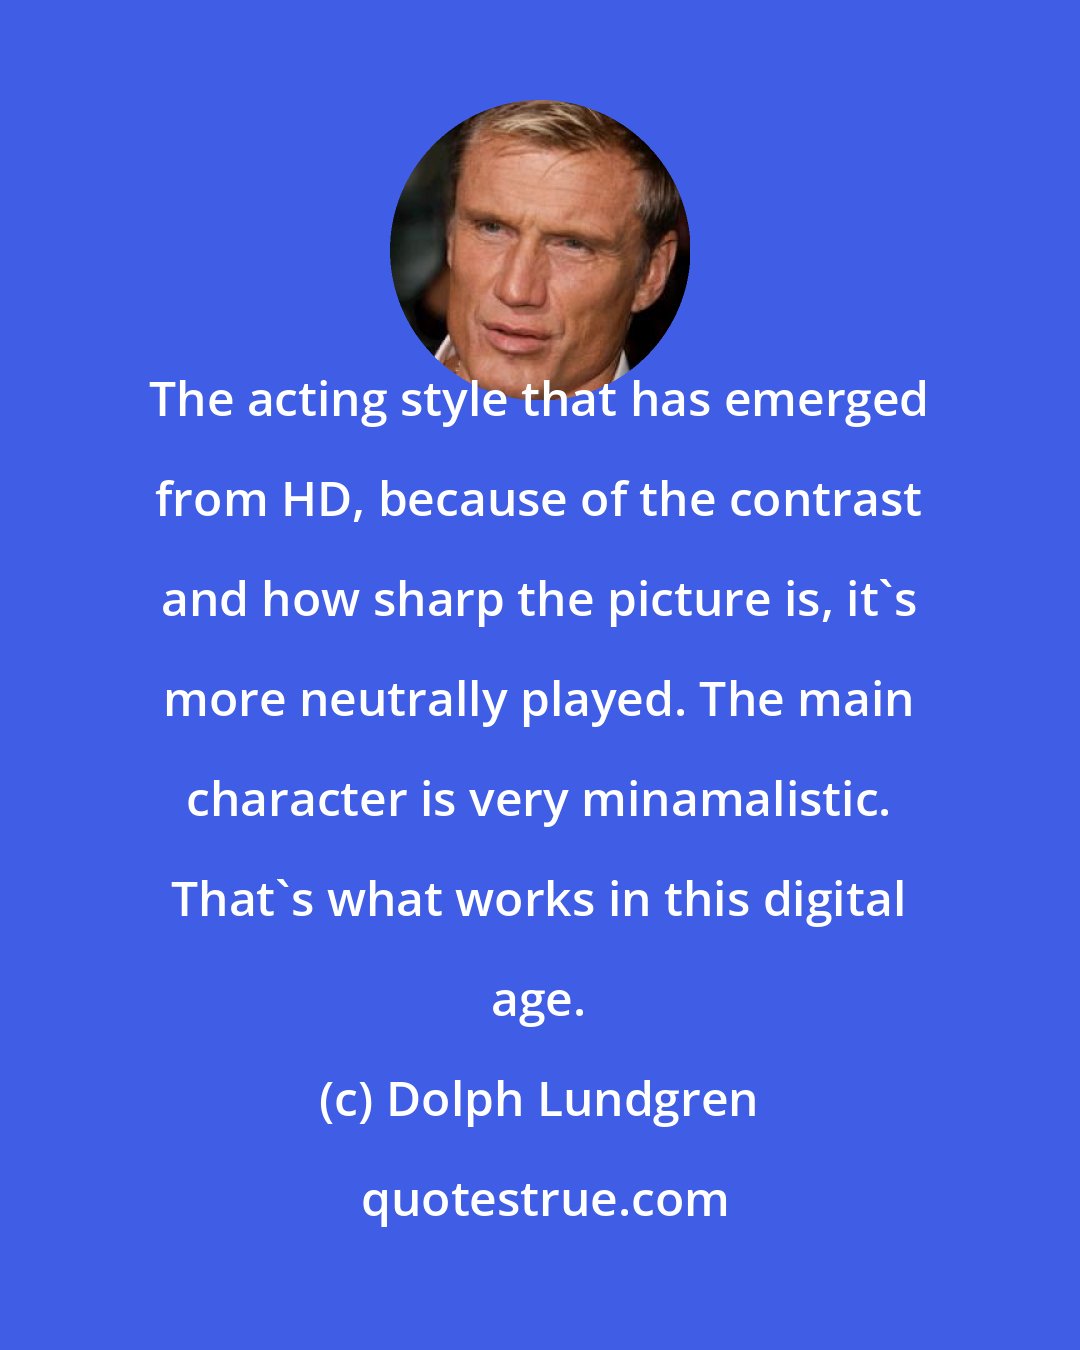 Dolph Lundgren: The acting style that has emerged from HD, because of the contrast and how sharp the picture is, it's more neutrally played. The main character is very minamalistic. That's what works in this digital age.